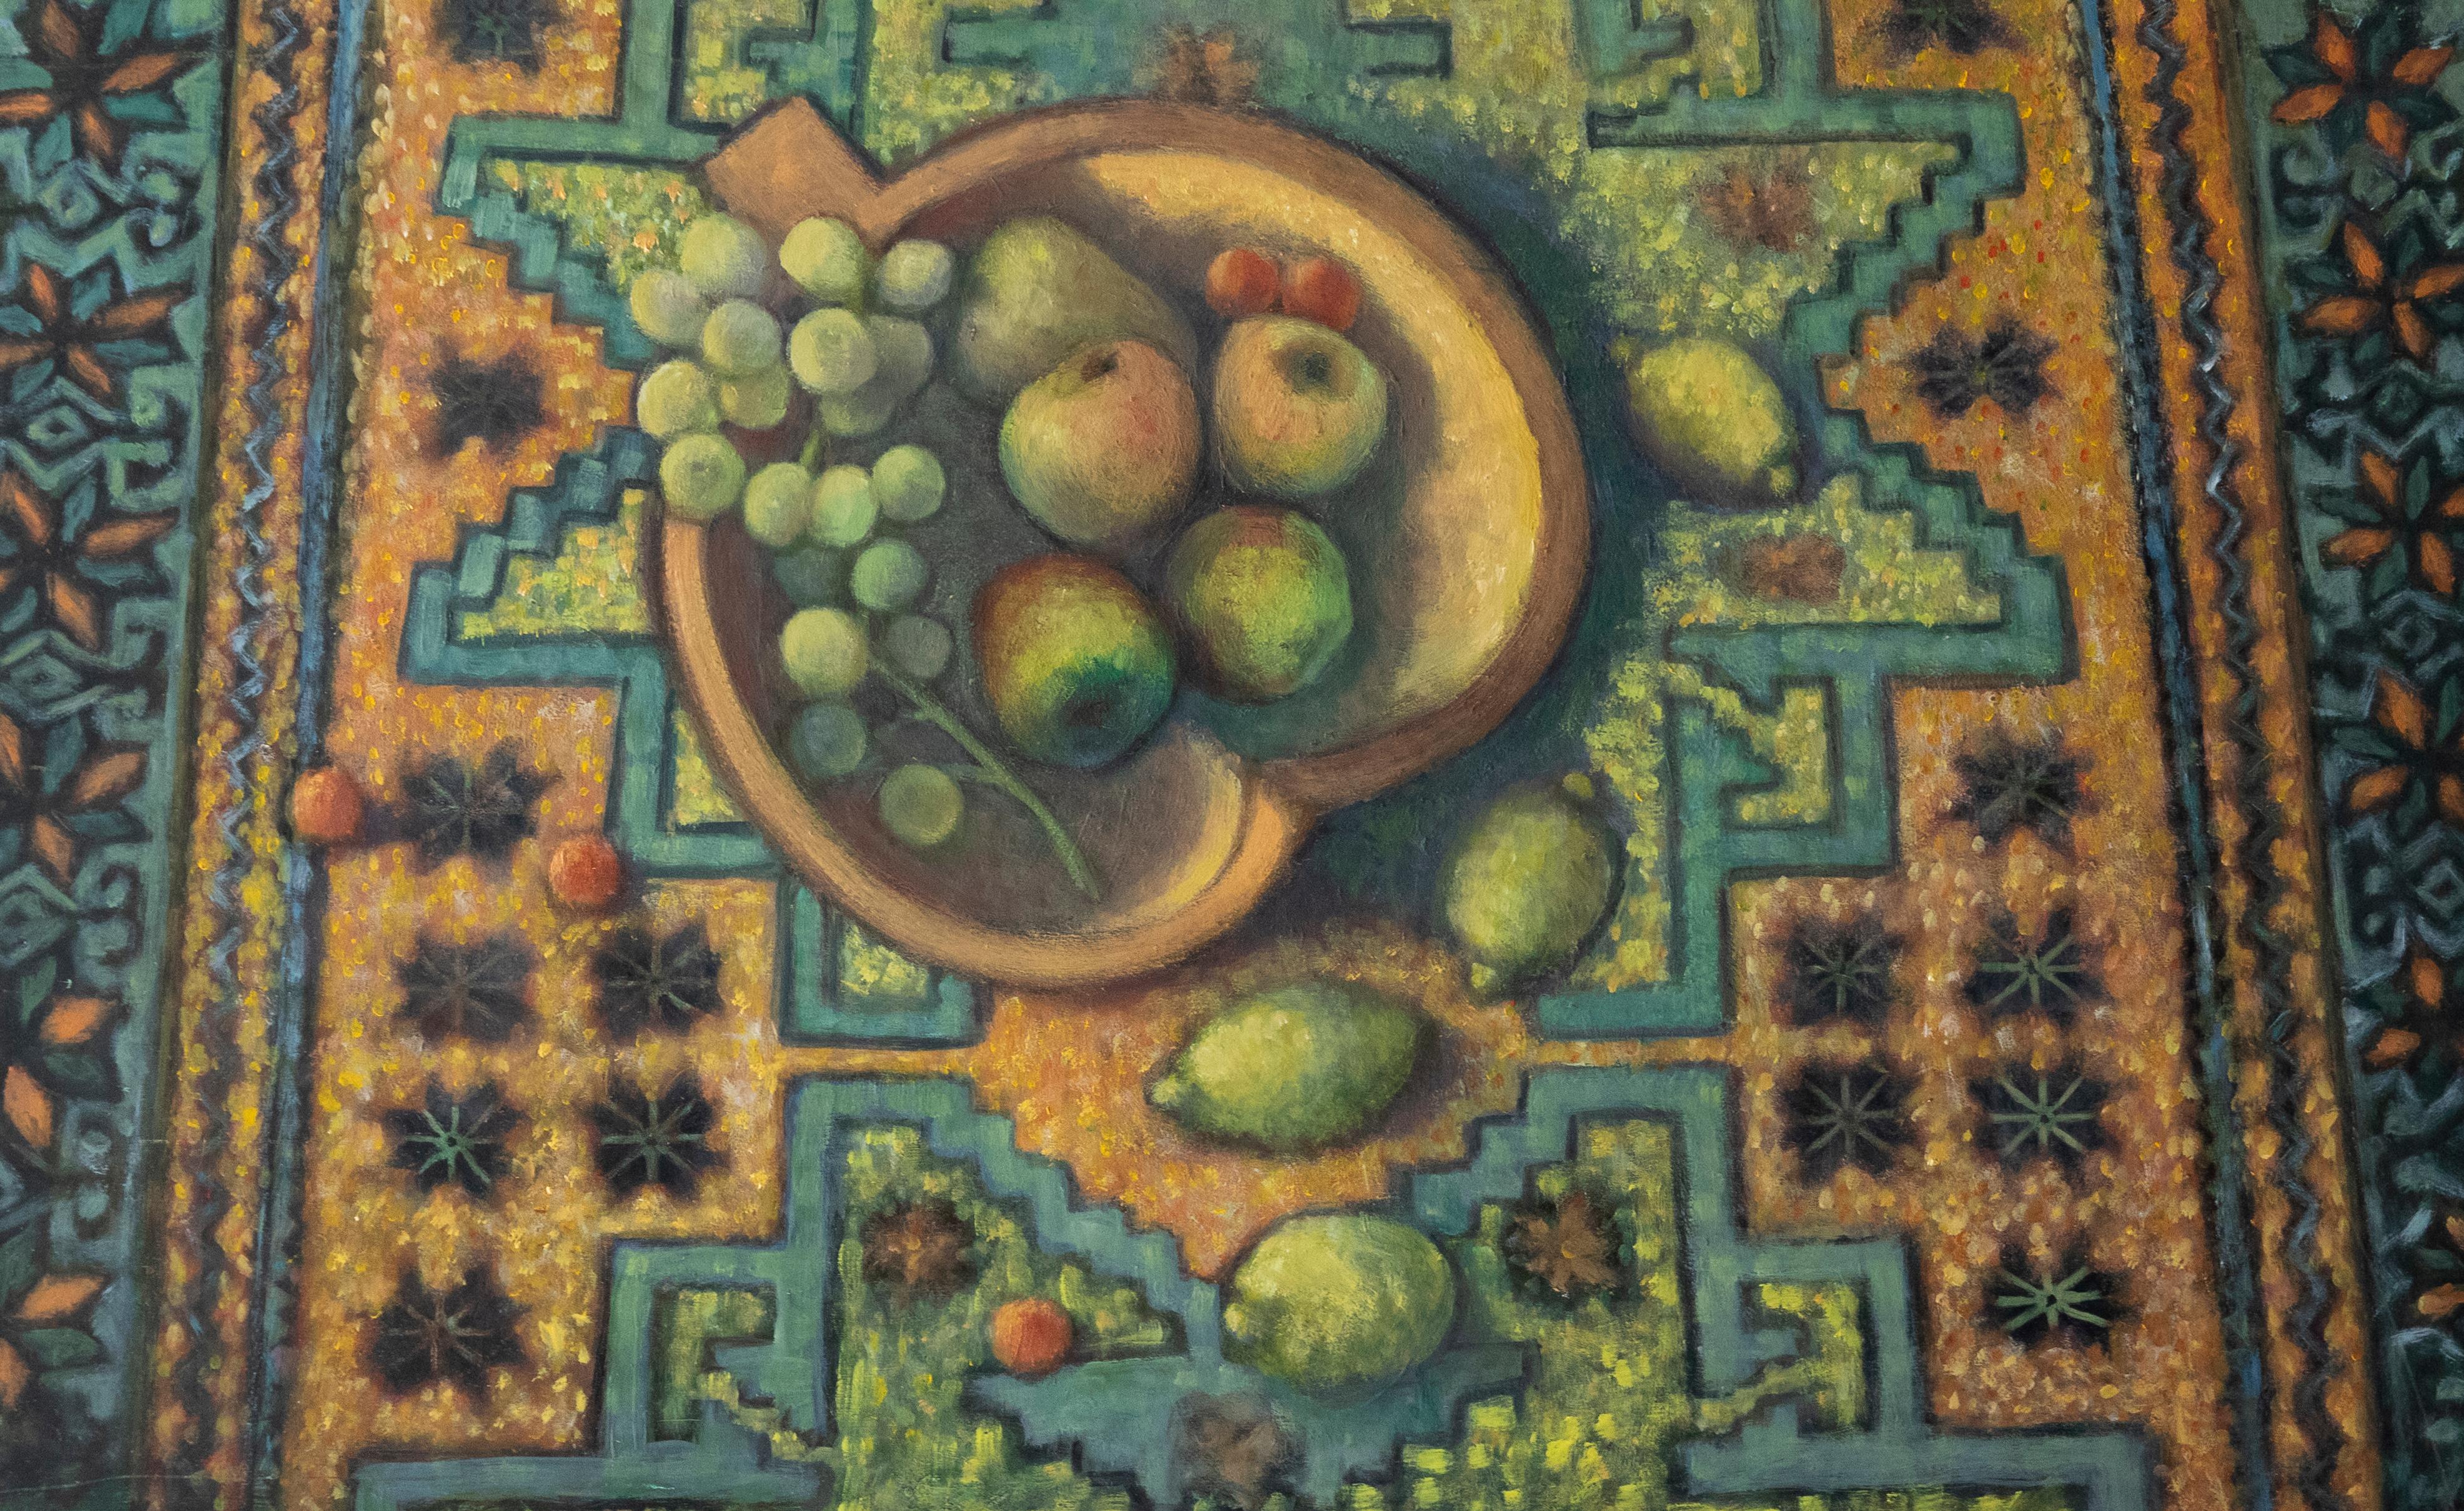 A charming still life study taking inspiration from the Bloomsbury school style. The scene depicts a bowl of grapes and apples surround by scattered lime on a vibrant textile surface. Unsigned. On board.
